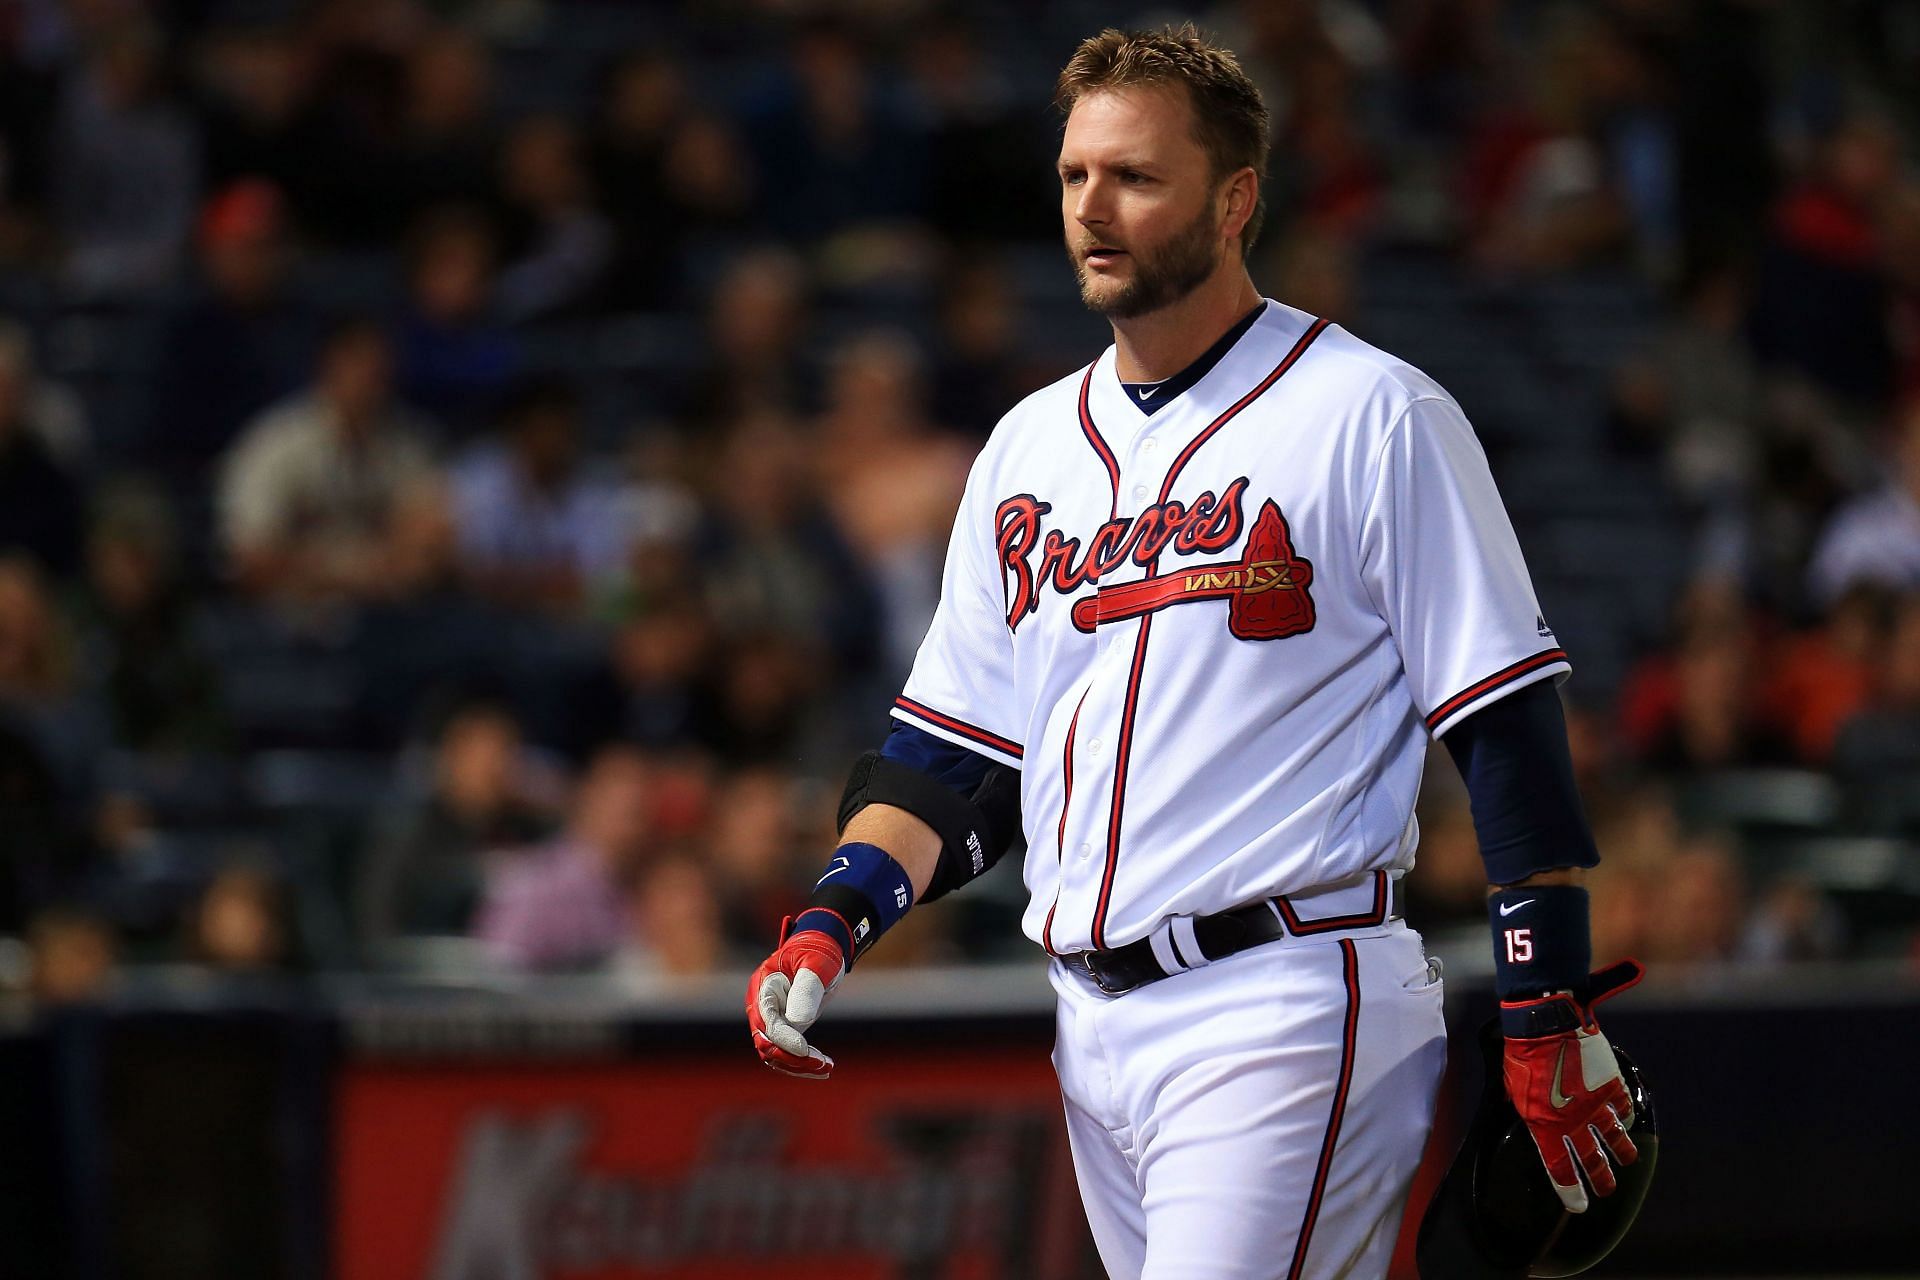 A.J. Pierzynski walks off the field after being thrown out in the fourth inning against the Arizona Diamondbacks at Turner Field